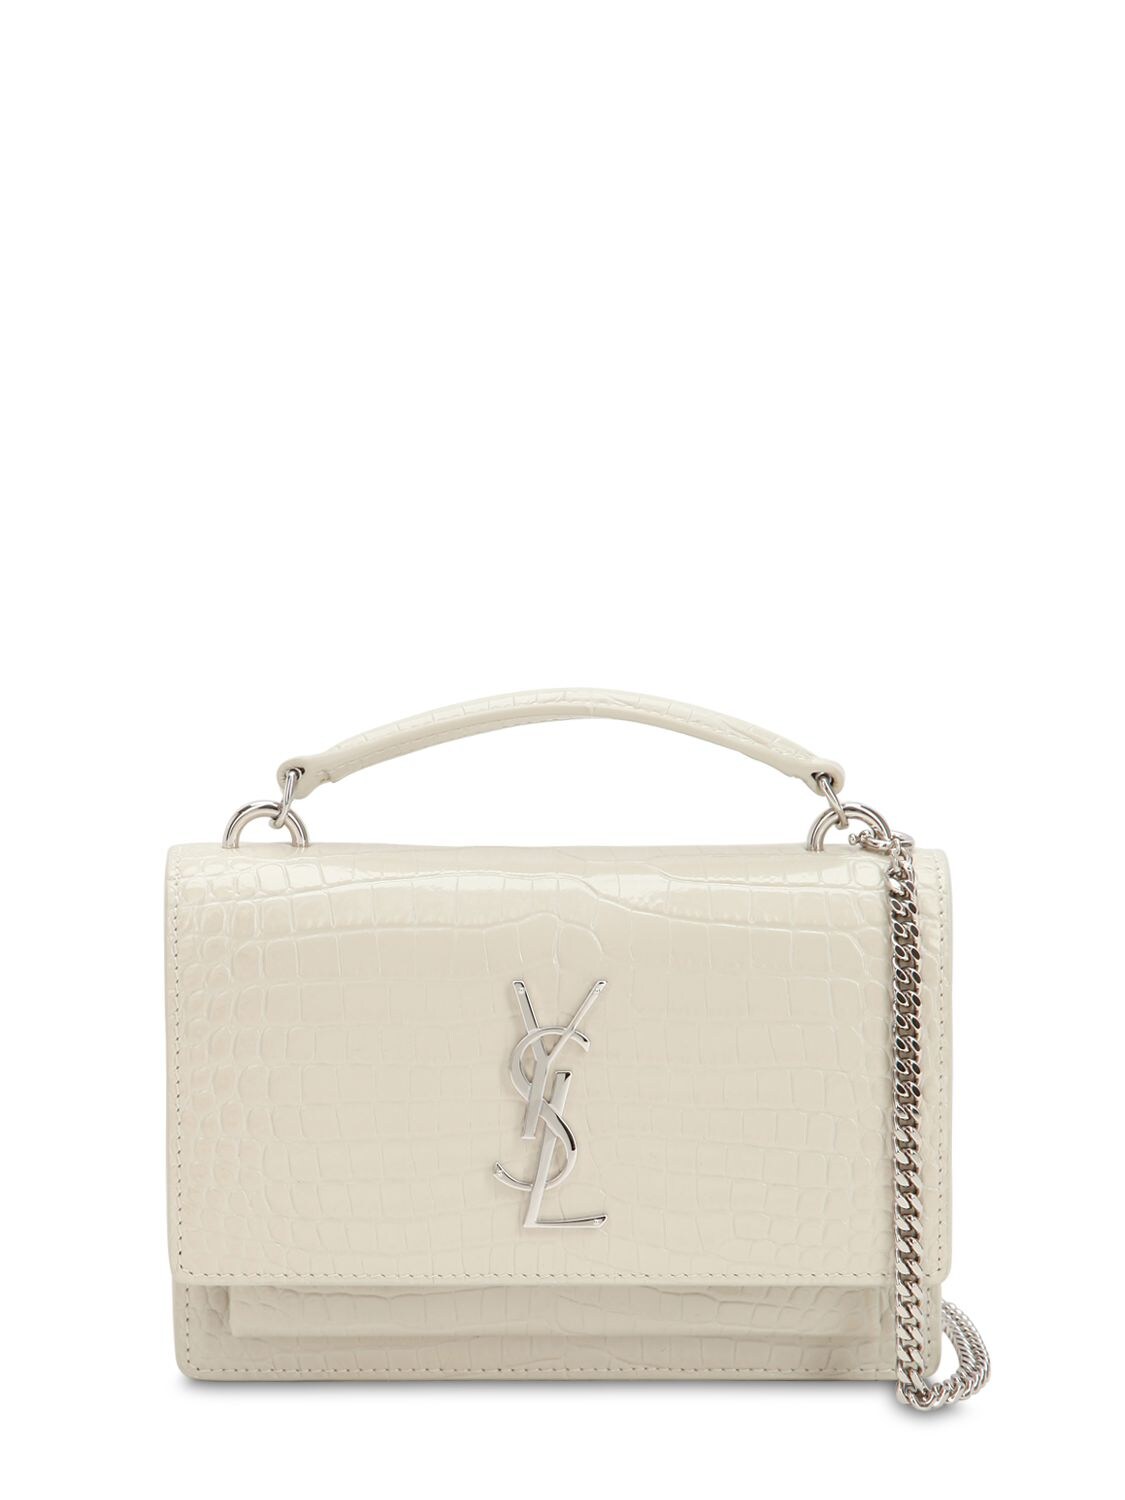 Saint Laurent Small Sunset Croc Embossed Leather Bag In White